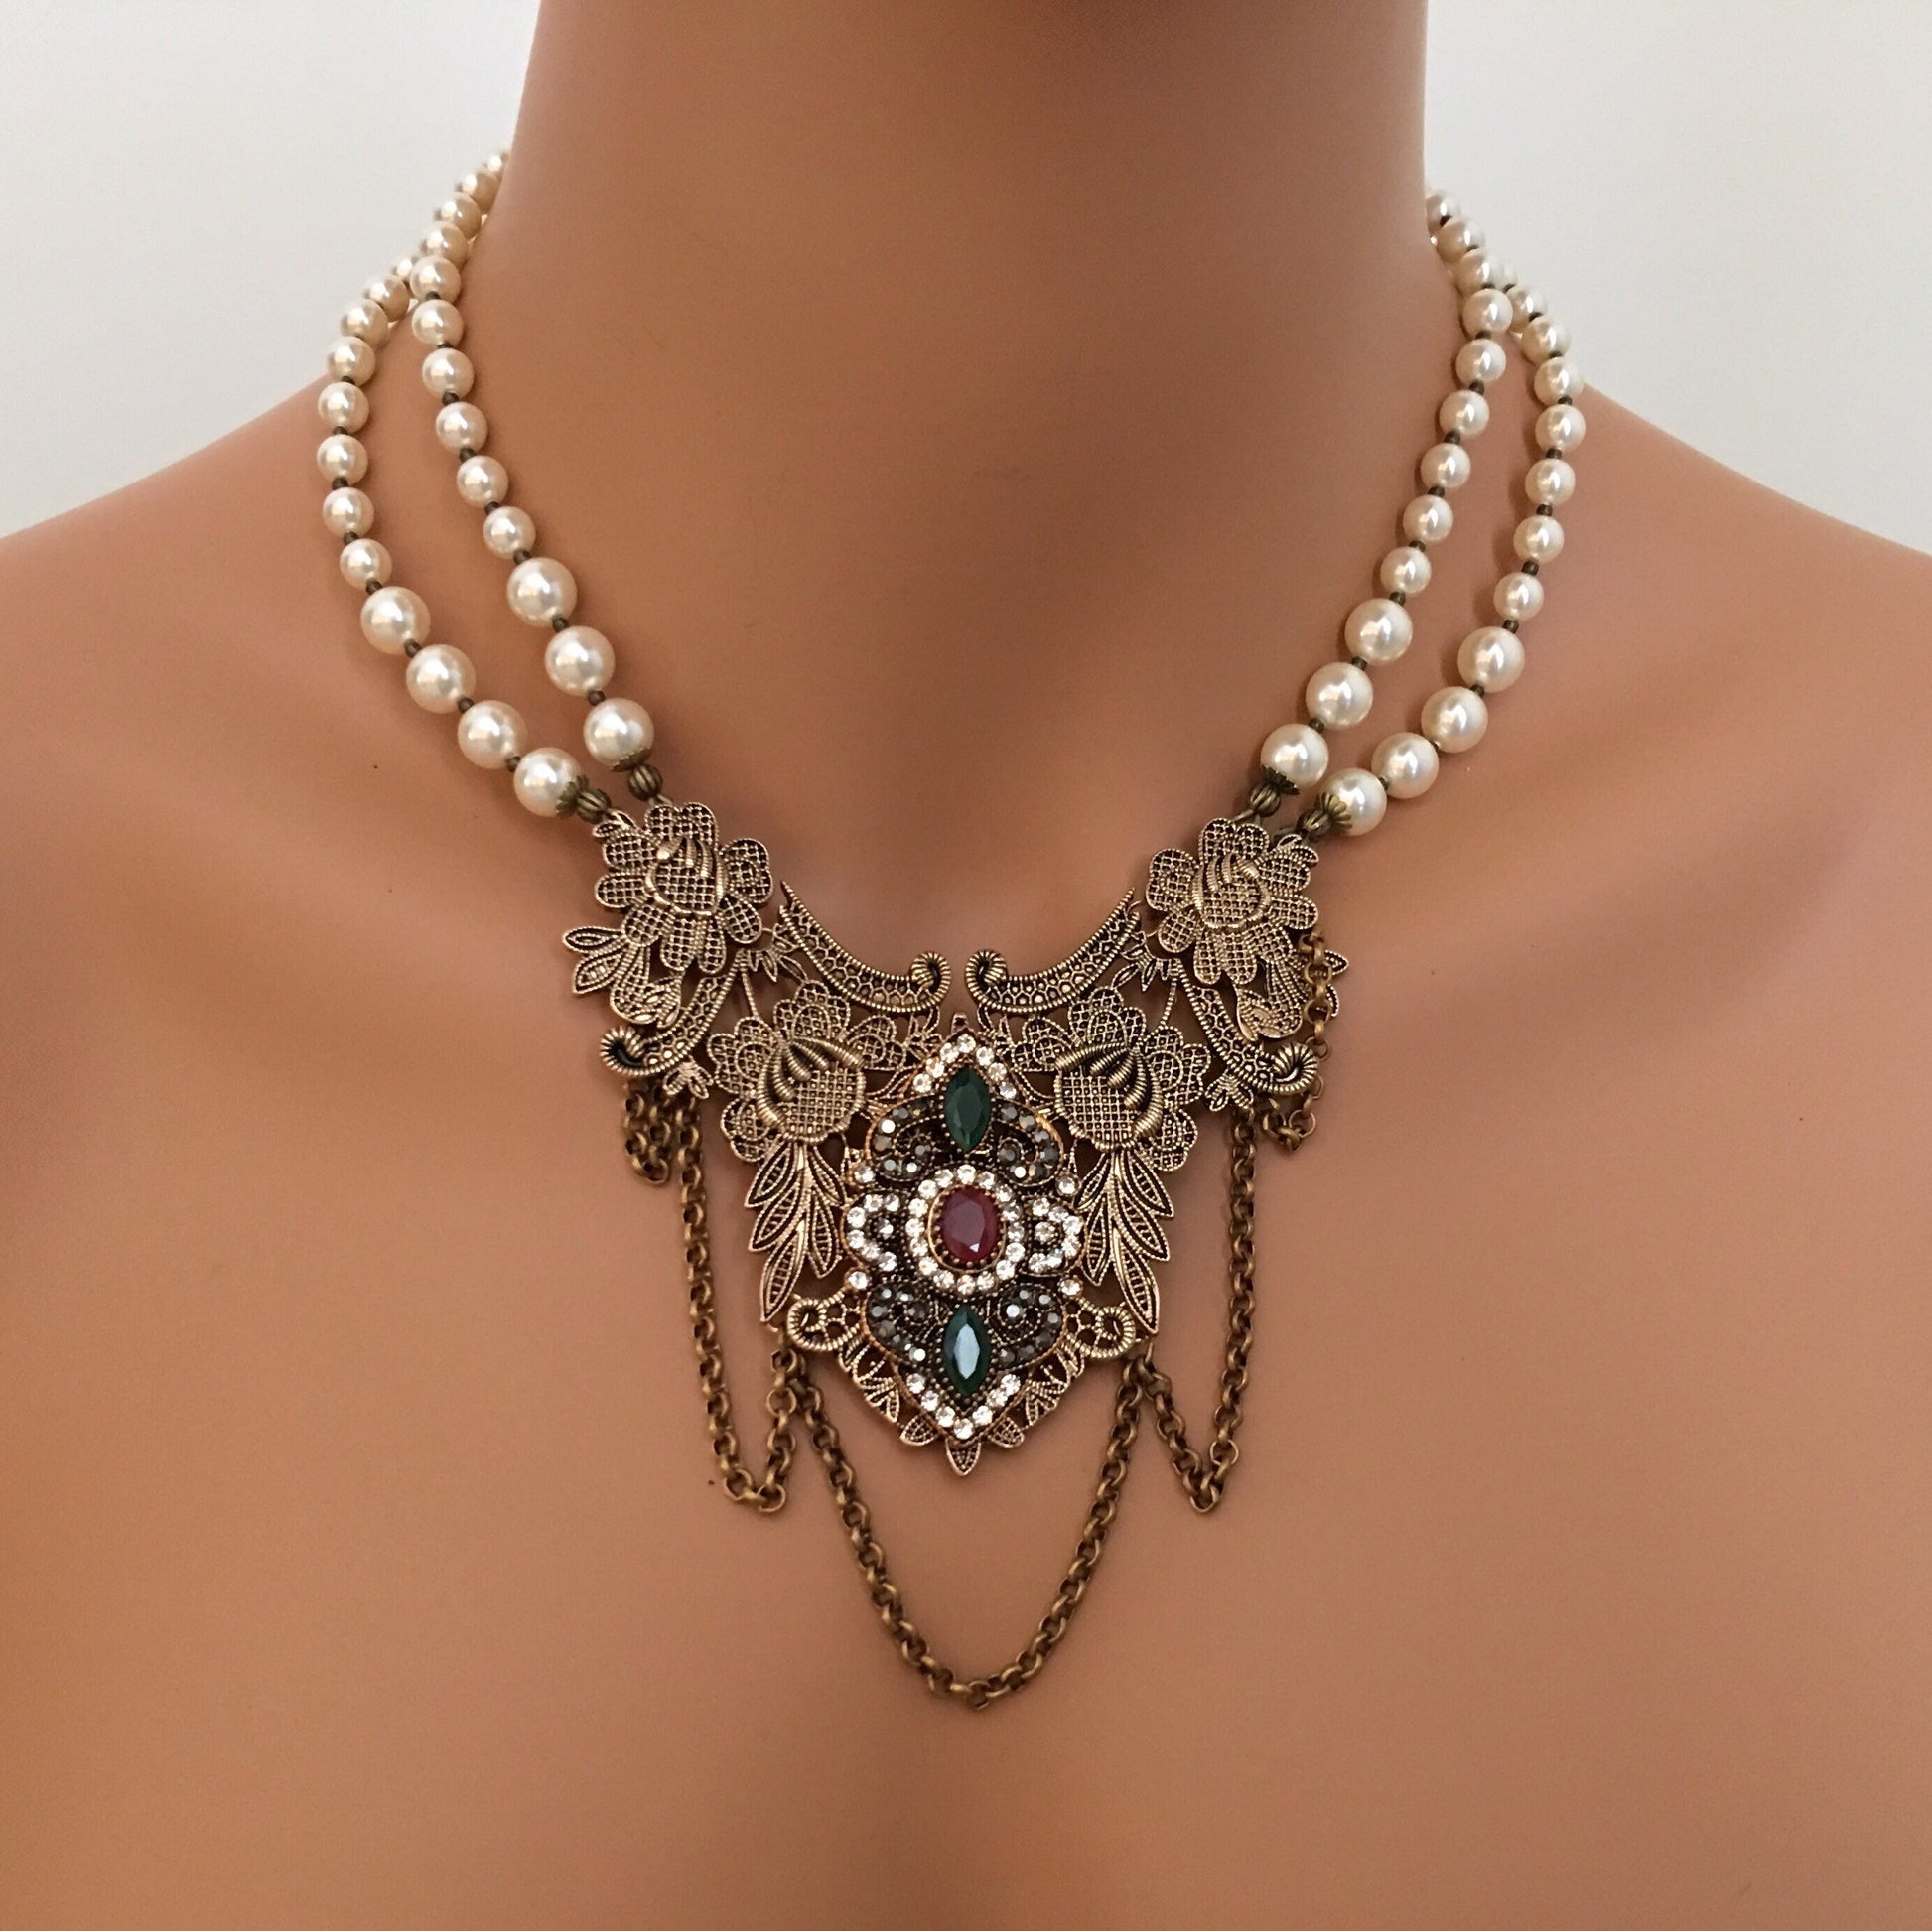 Victorian Necklace Set Vintage style with Earrings antique bronze gold cream ivory crystal pearls Rennaissance medieval historical costume